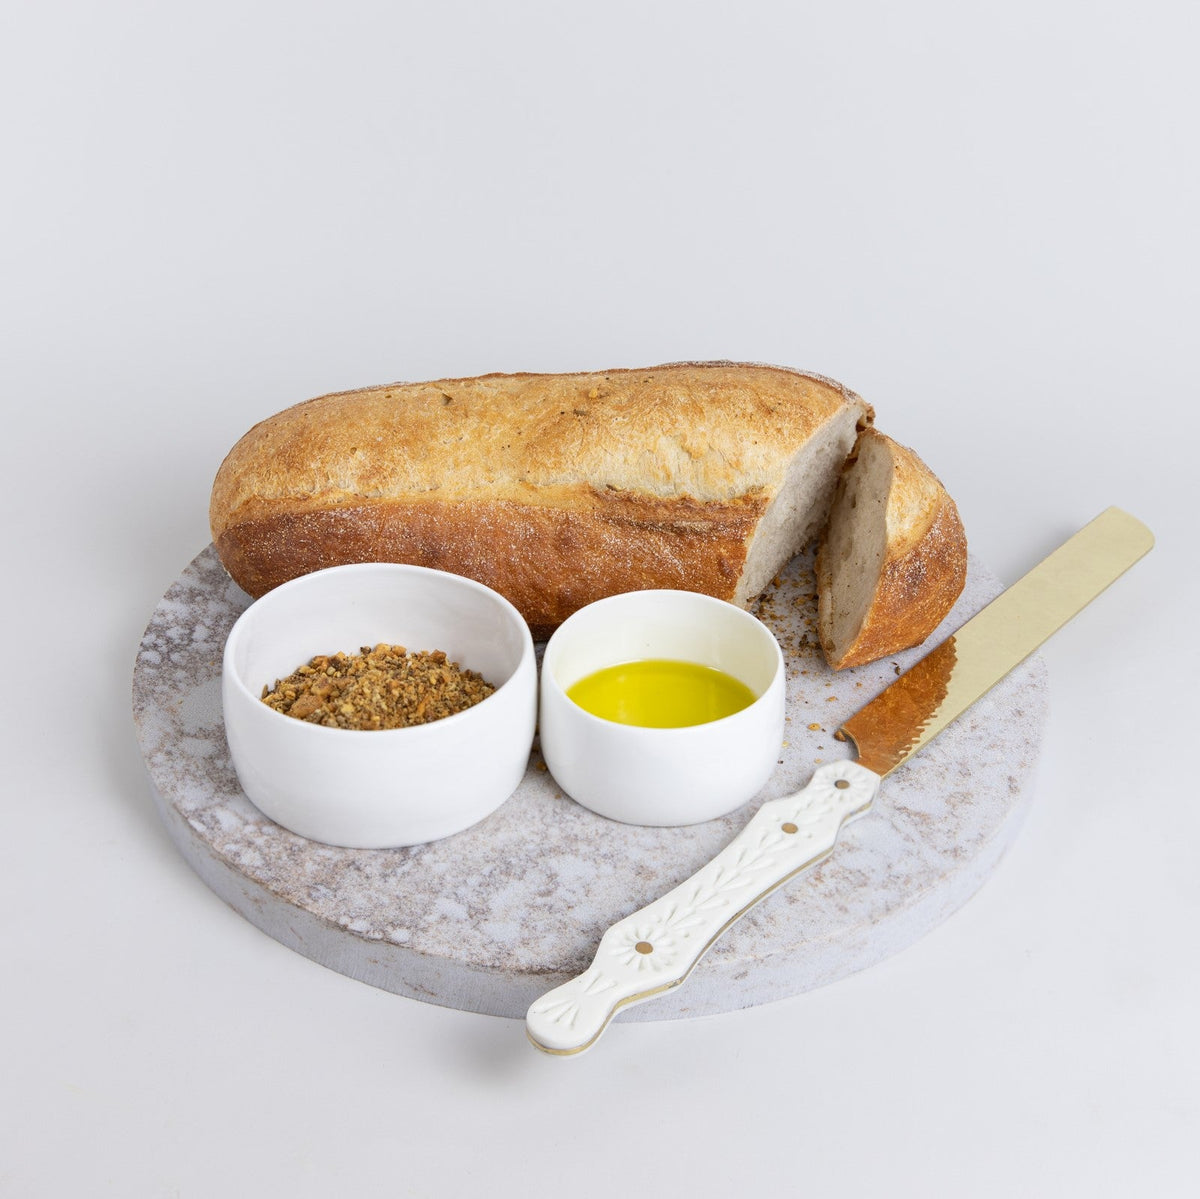 Large Quartz Round Serving Platter in Caeserstone Excava by Aureliia Collection. This serving 30cm round platter is shown styled with fresh baked bread, dukka, olive oil and bread knife. An excellent home decor addition for the avid entertainer. Gift ideas for someone who has everything.